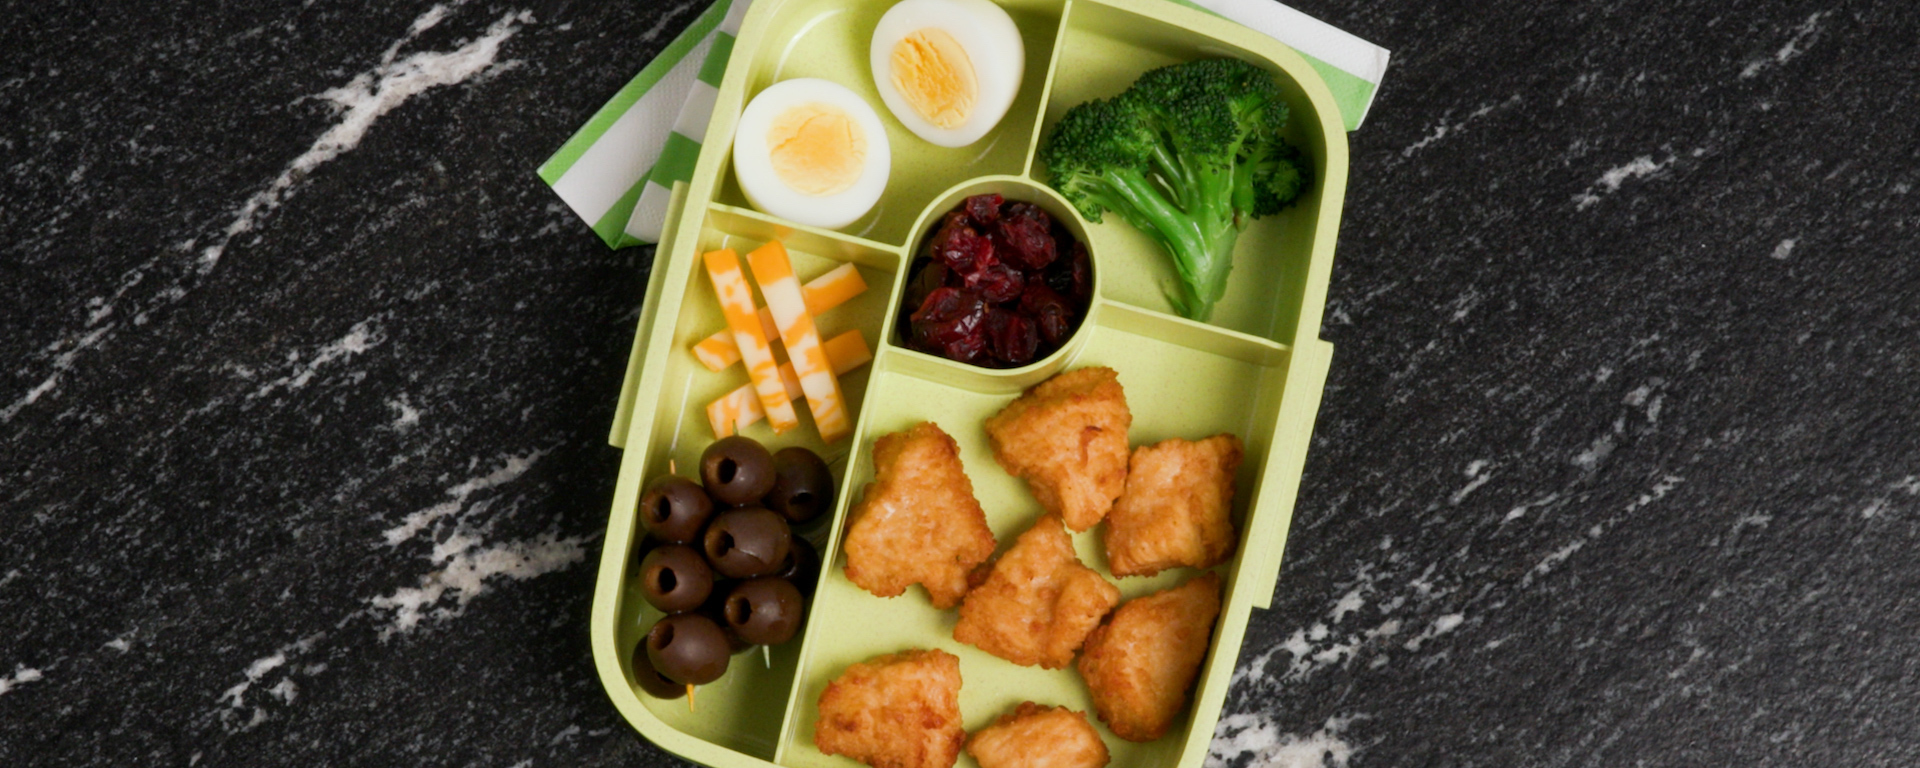 https://www.justbarefoods.com/wp-content/uploads/2023/05/Monday-No-Label-Bento-Box-May-2023-5x2-1.jpg